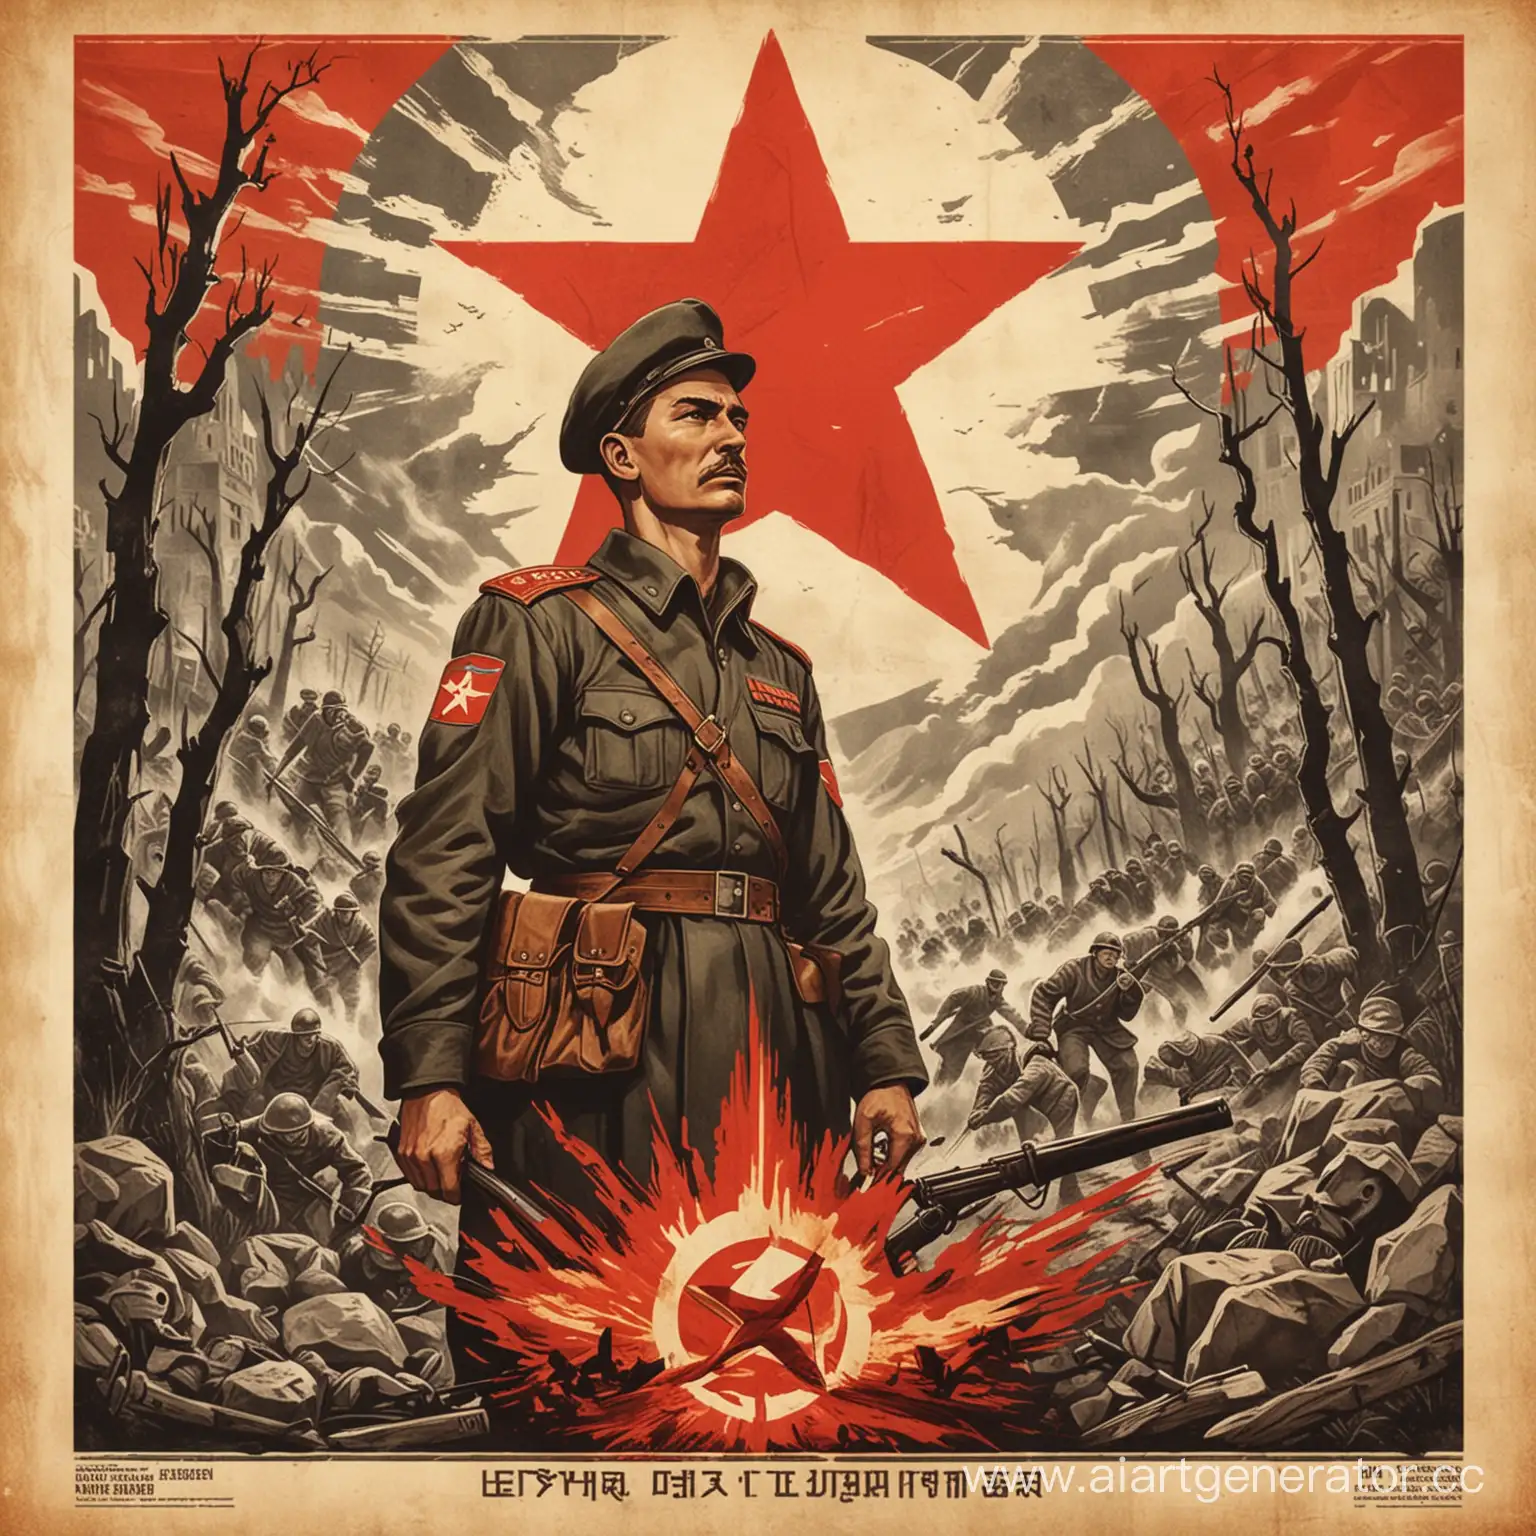 Honoring-the-Legacy-Great-Patriotic-War-Tribute-Poster-in-Soviet-Style